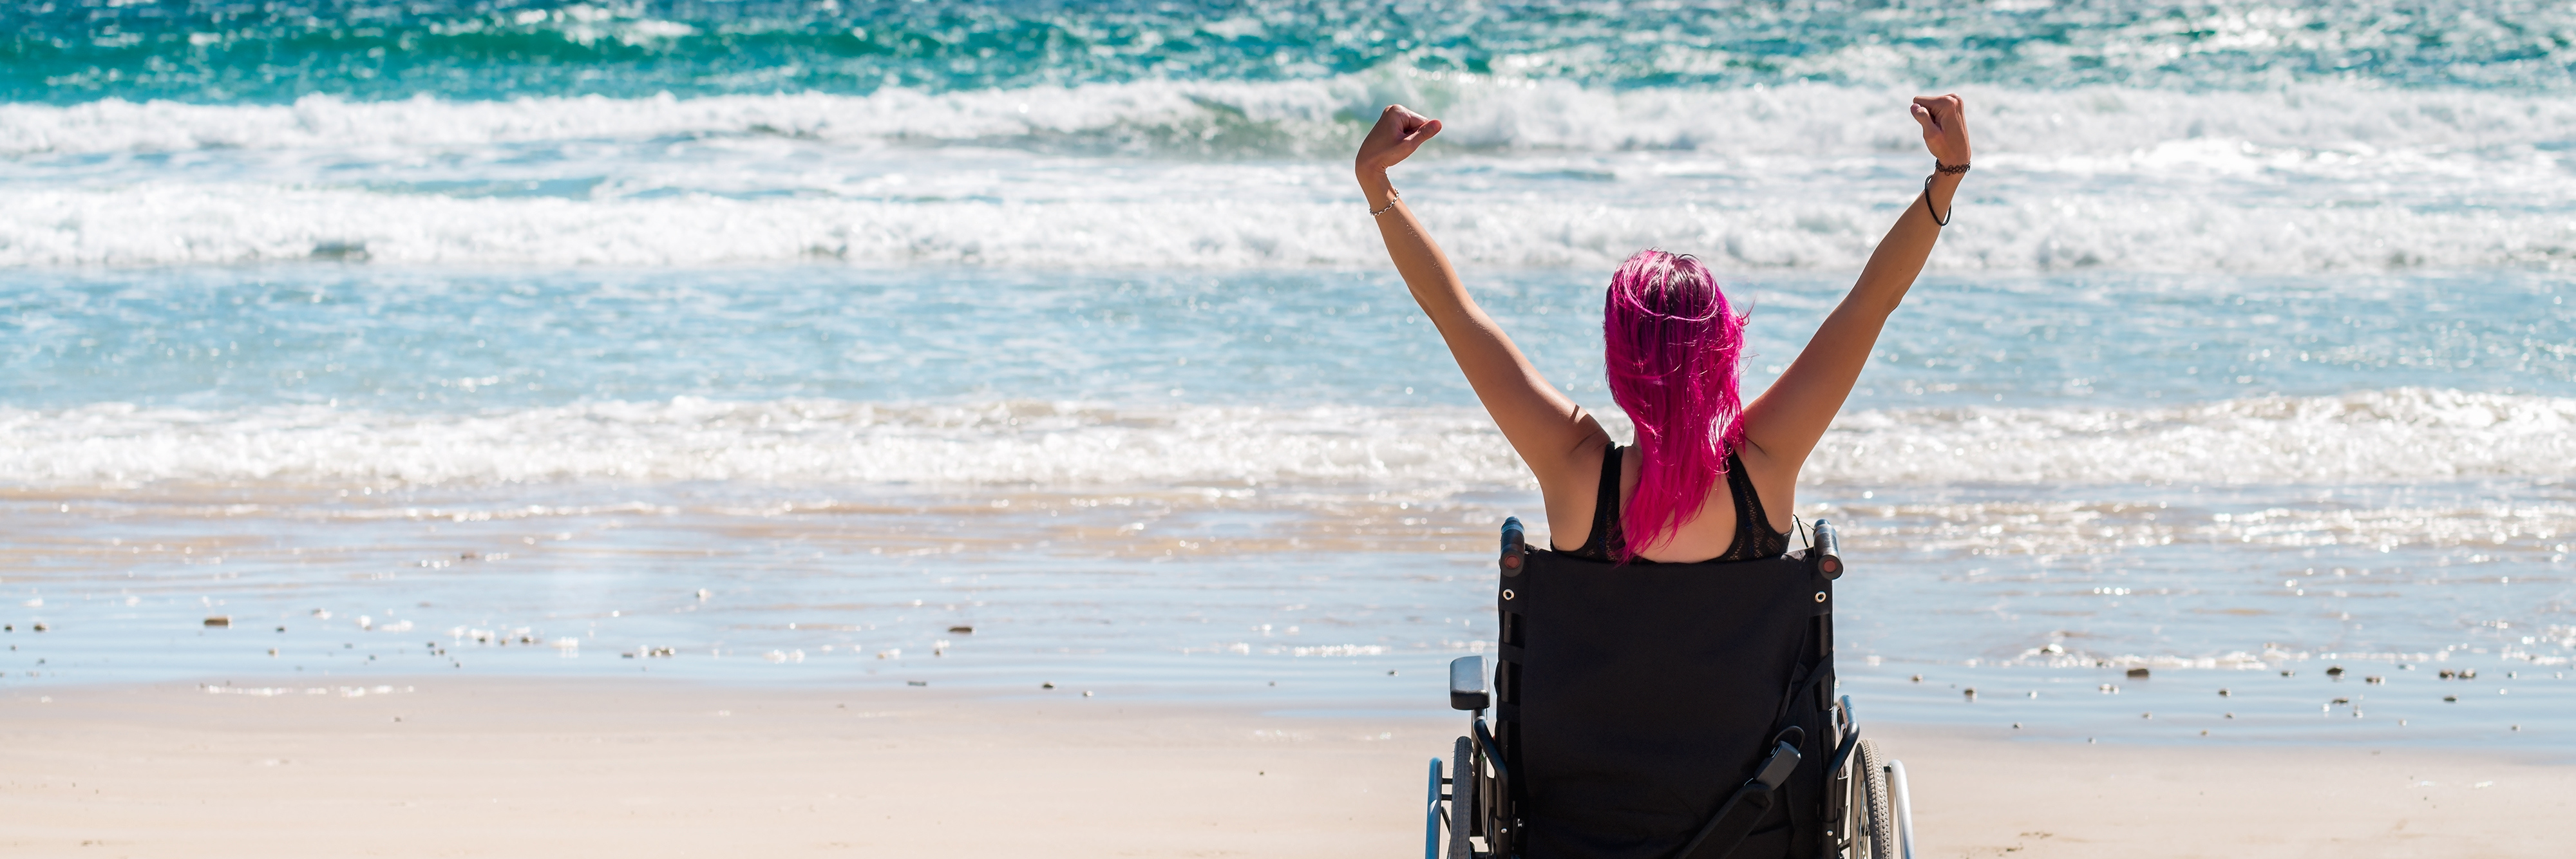 Disabled woman in a wheelchair on the beach.